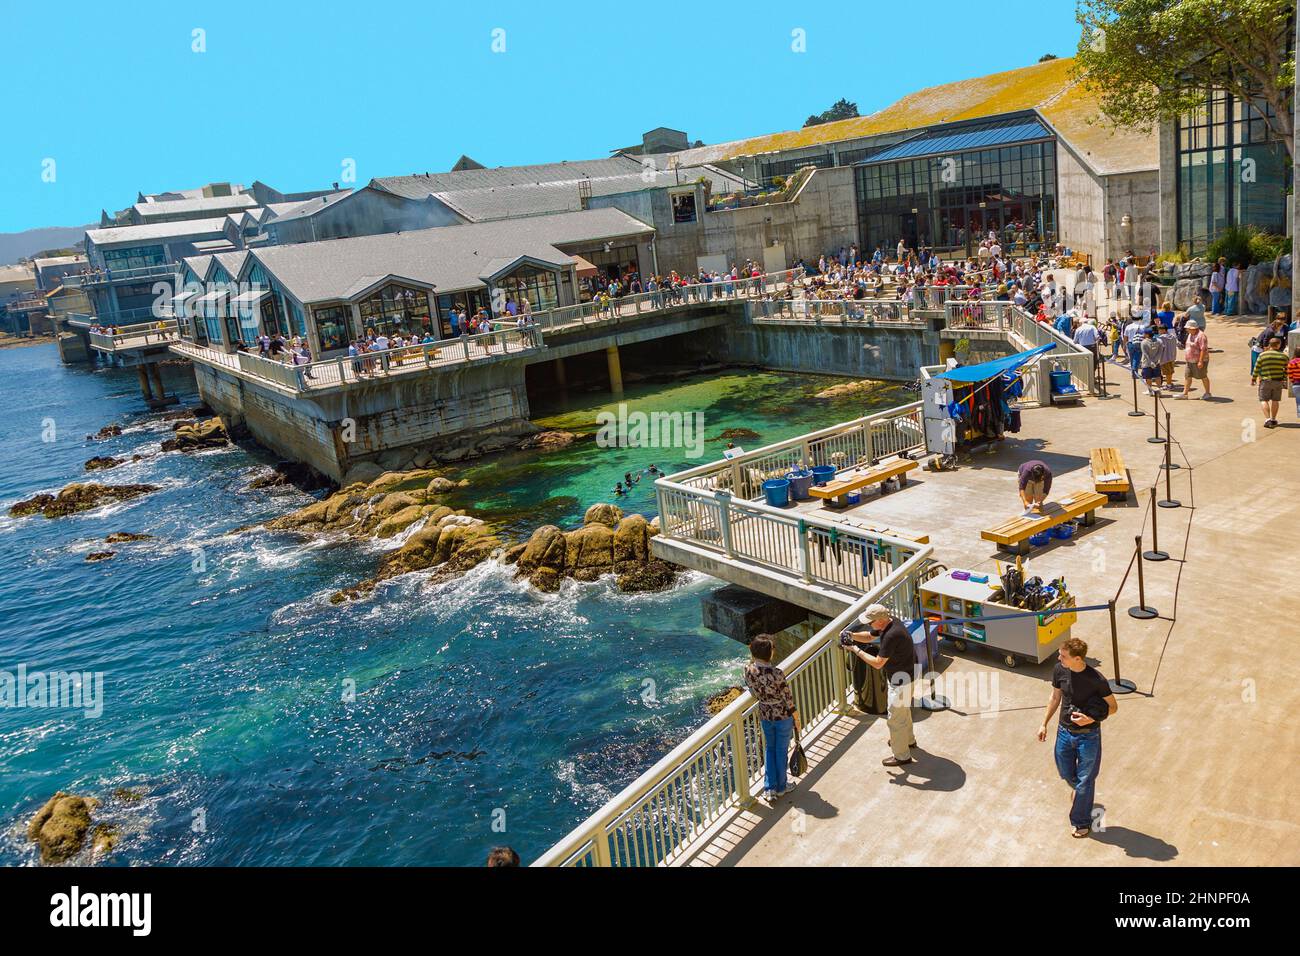 people enjoy the view to Monterrey aquarium and ocean at the sightseeing platform Stock Photo